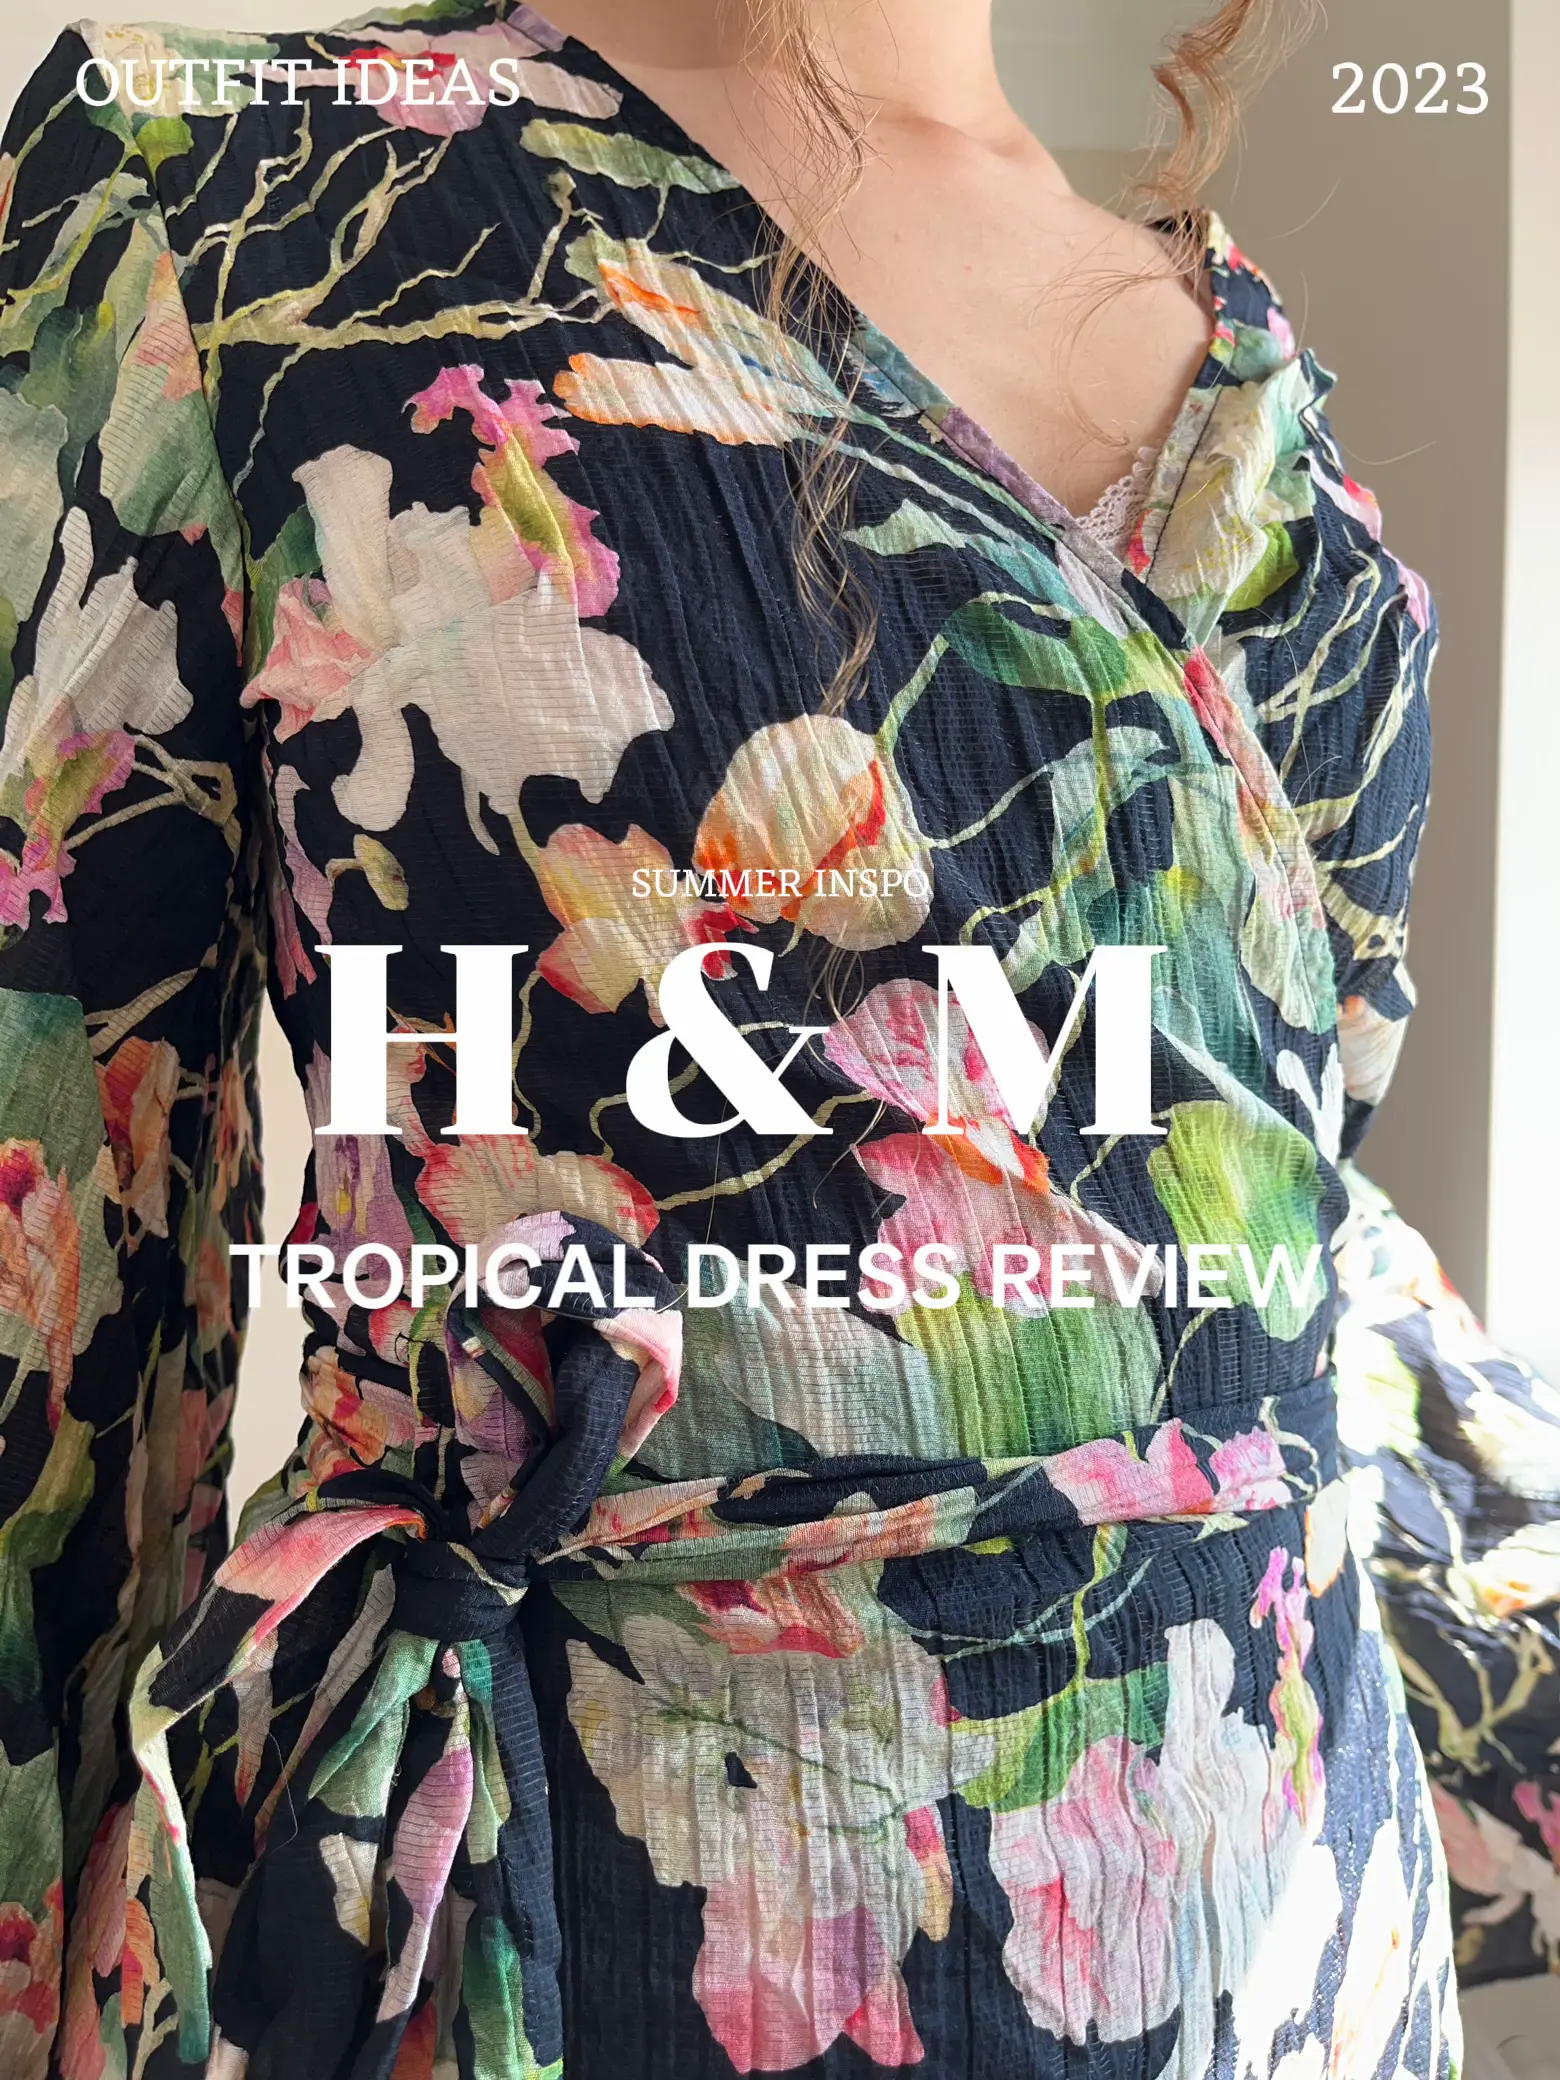 H&M - Skims dress dupe!! The best dupe for only £18.99 #hm #hmdress #